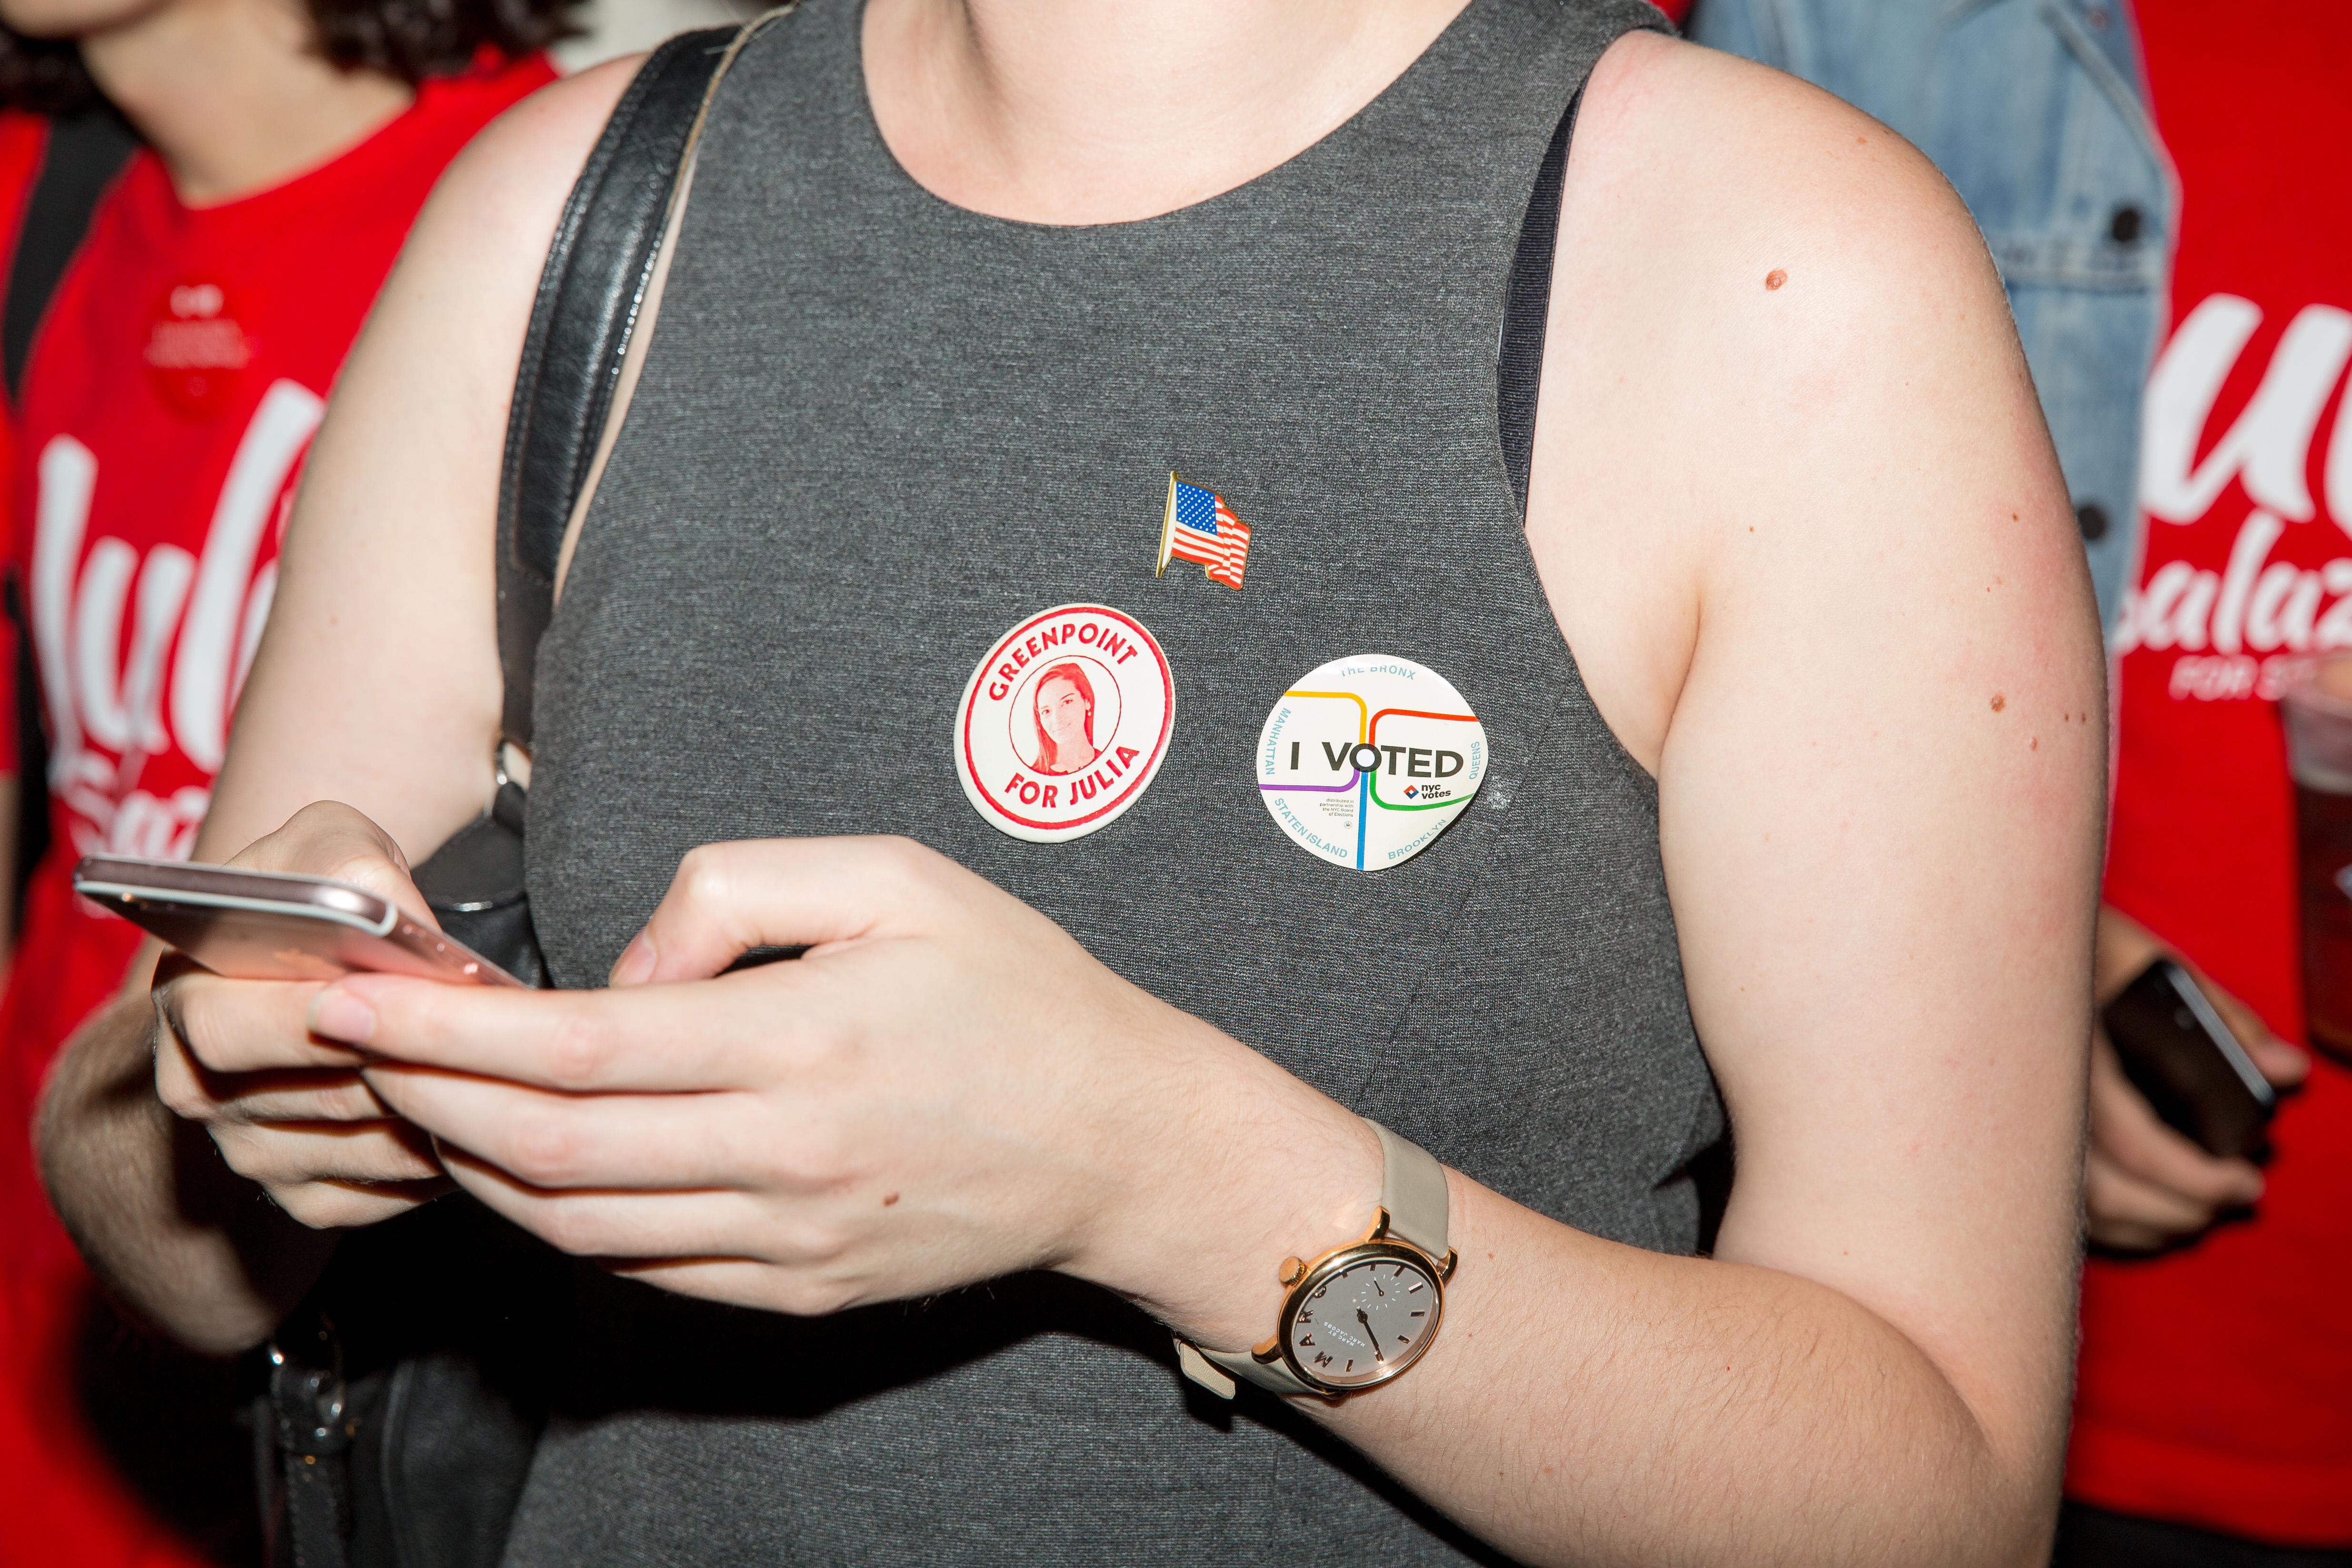 A supporter of the Democratic Socialist candidate Julia Salazar wears stickers on her shirt on the night of the New York State Primary moments before Salazar defeated incumbent Democrat State Senator Marty Dilan on September 13, 2018 in New York City.